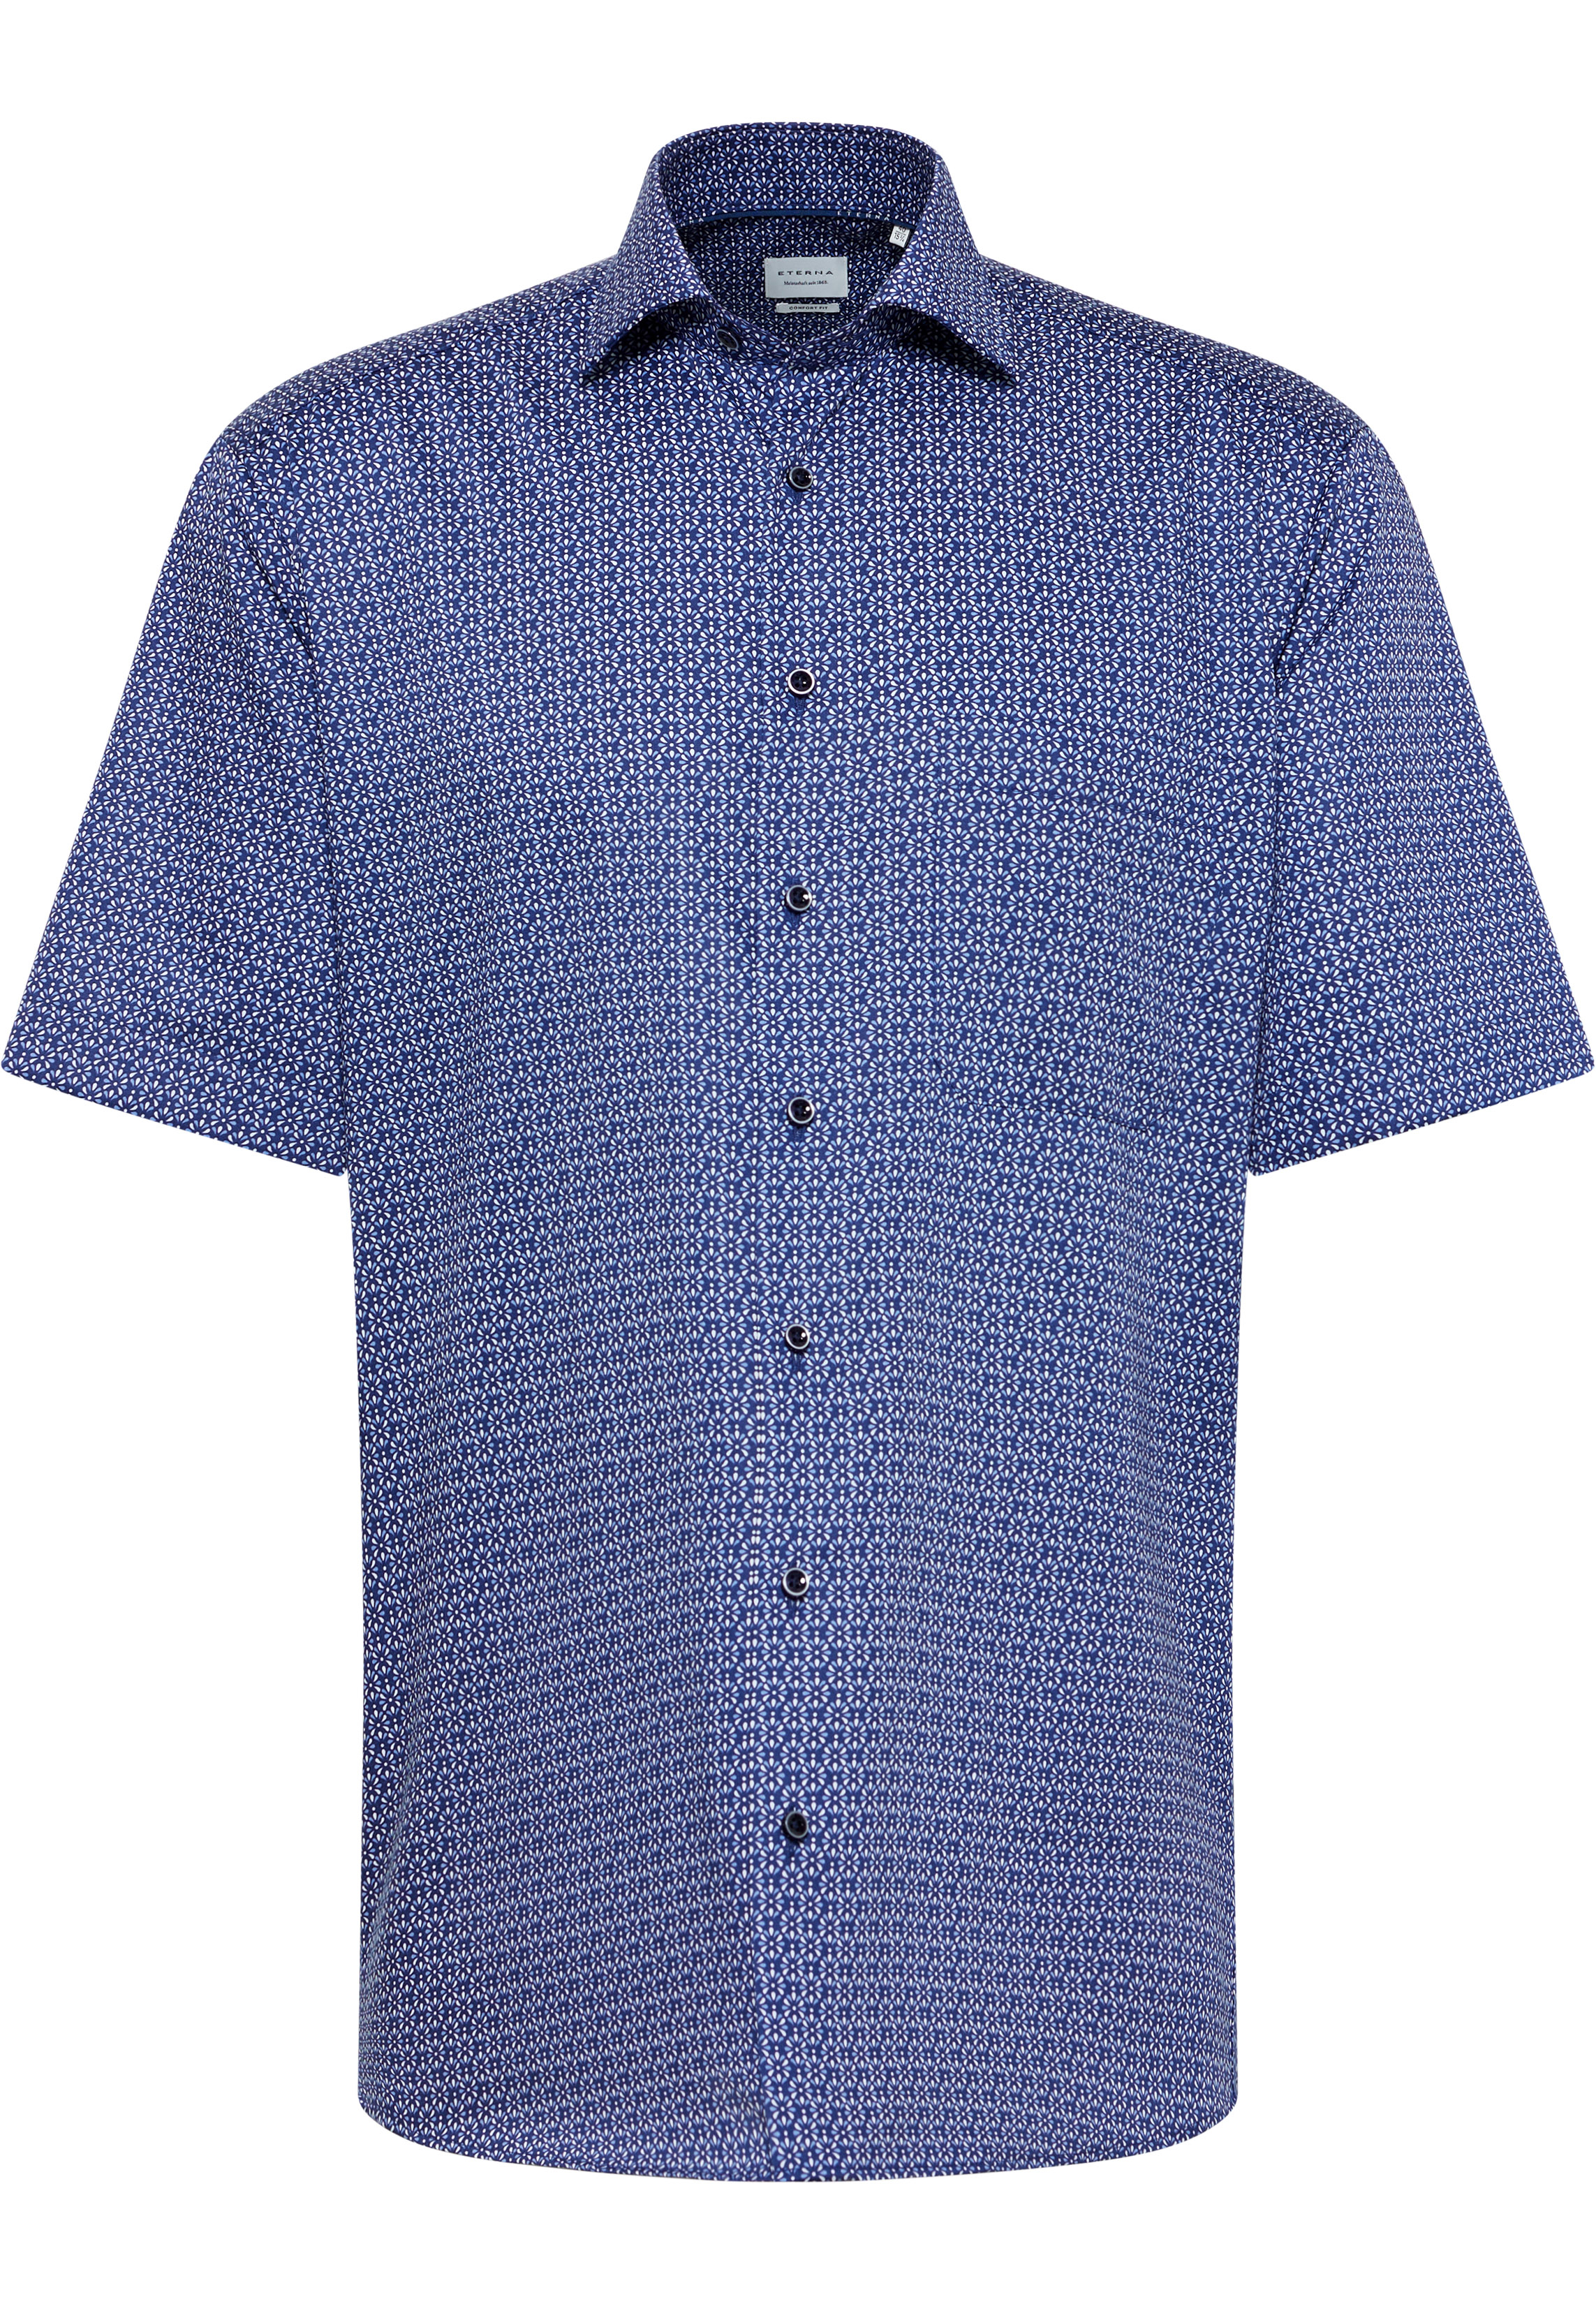 COMFORT FIT Shirt in navy printed